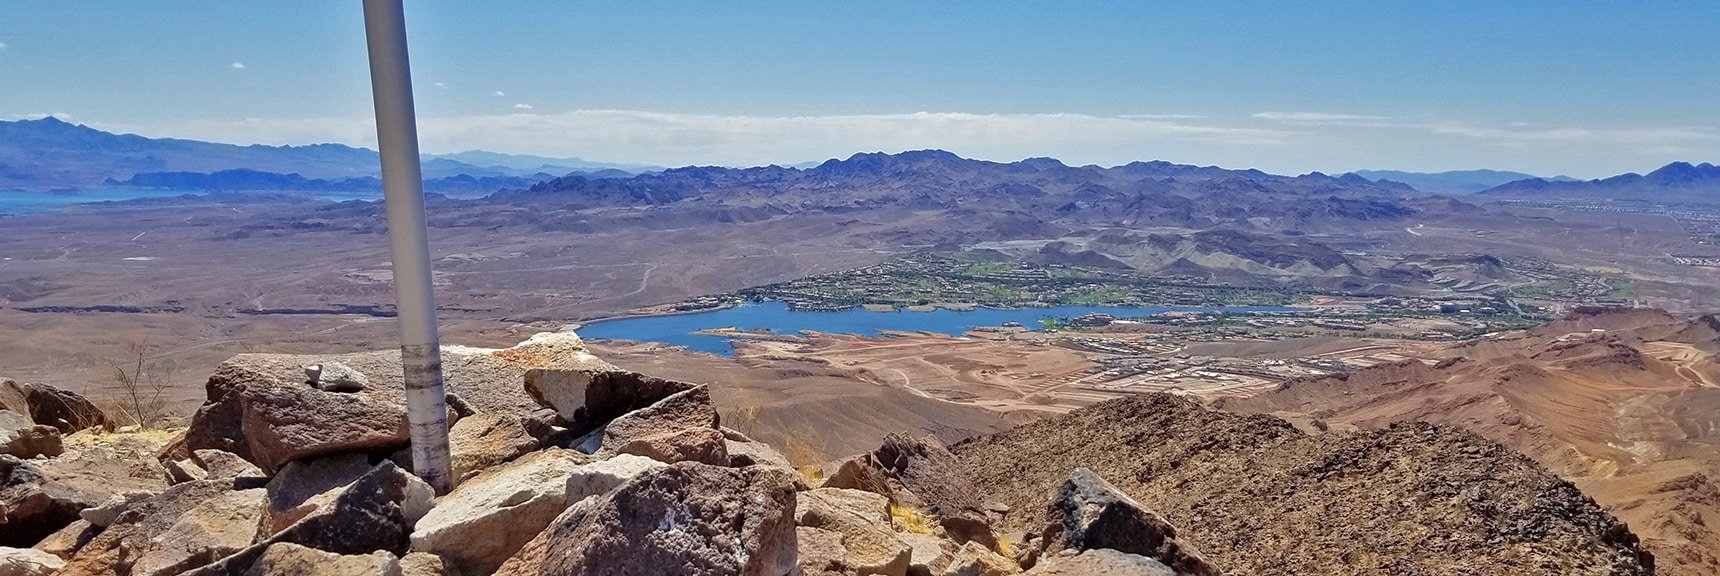 Lake Las Vegas from Lava Butte Summit | Lava Butte | Lake Mead National Recreation Area, Nevada